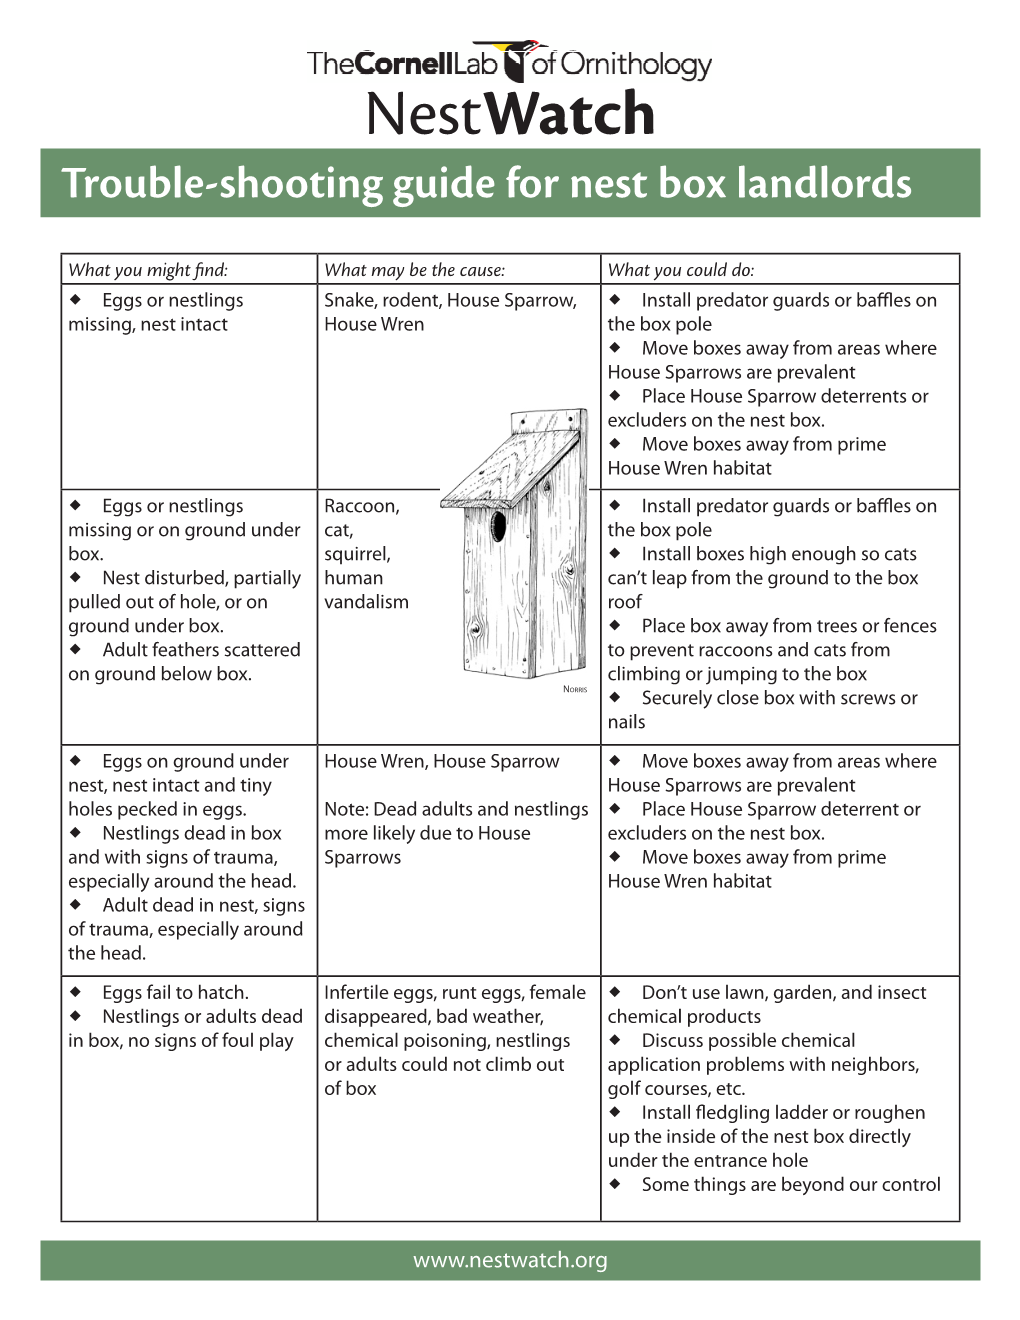 Nestwatch Trouble-Shooting Guide for Nest Box Landlords